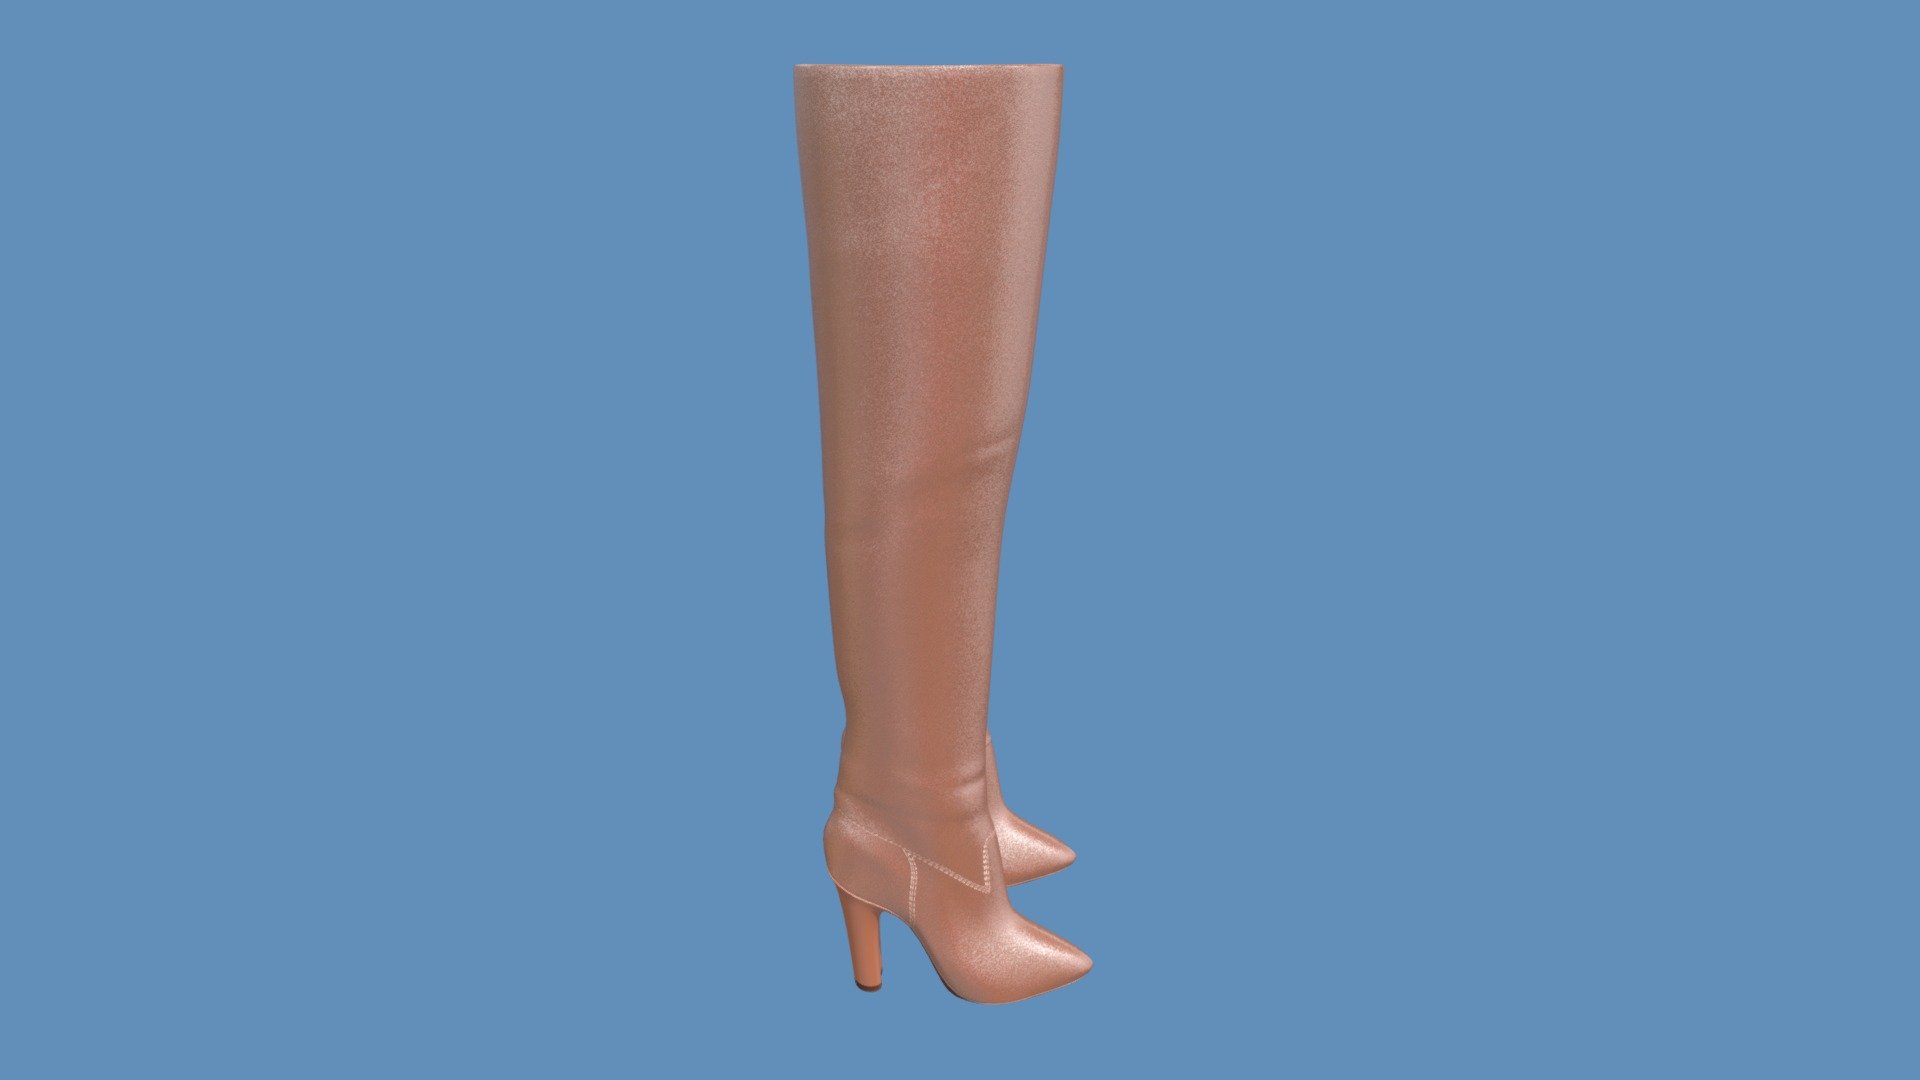 3D model of a pair of female high knee leather boots.
Created in Blender 3.0.0.
The whole model is textured, with fully unwrapped UVs. 2048x2048 PNG texture maps are provided (color, roughness, normal, specular).
Model consists of 23008 faces and 23274 vertices 3d model